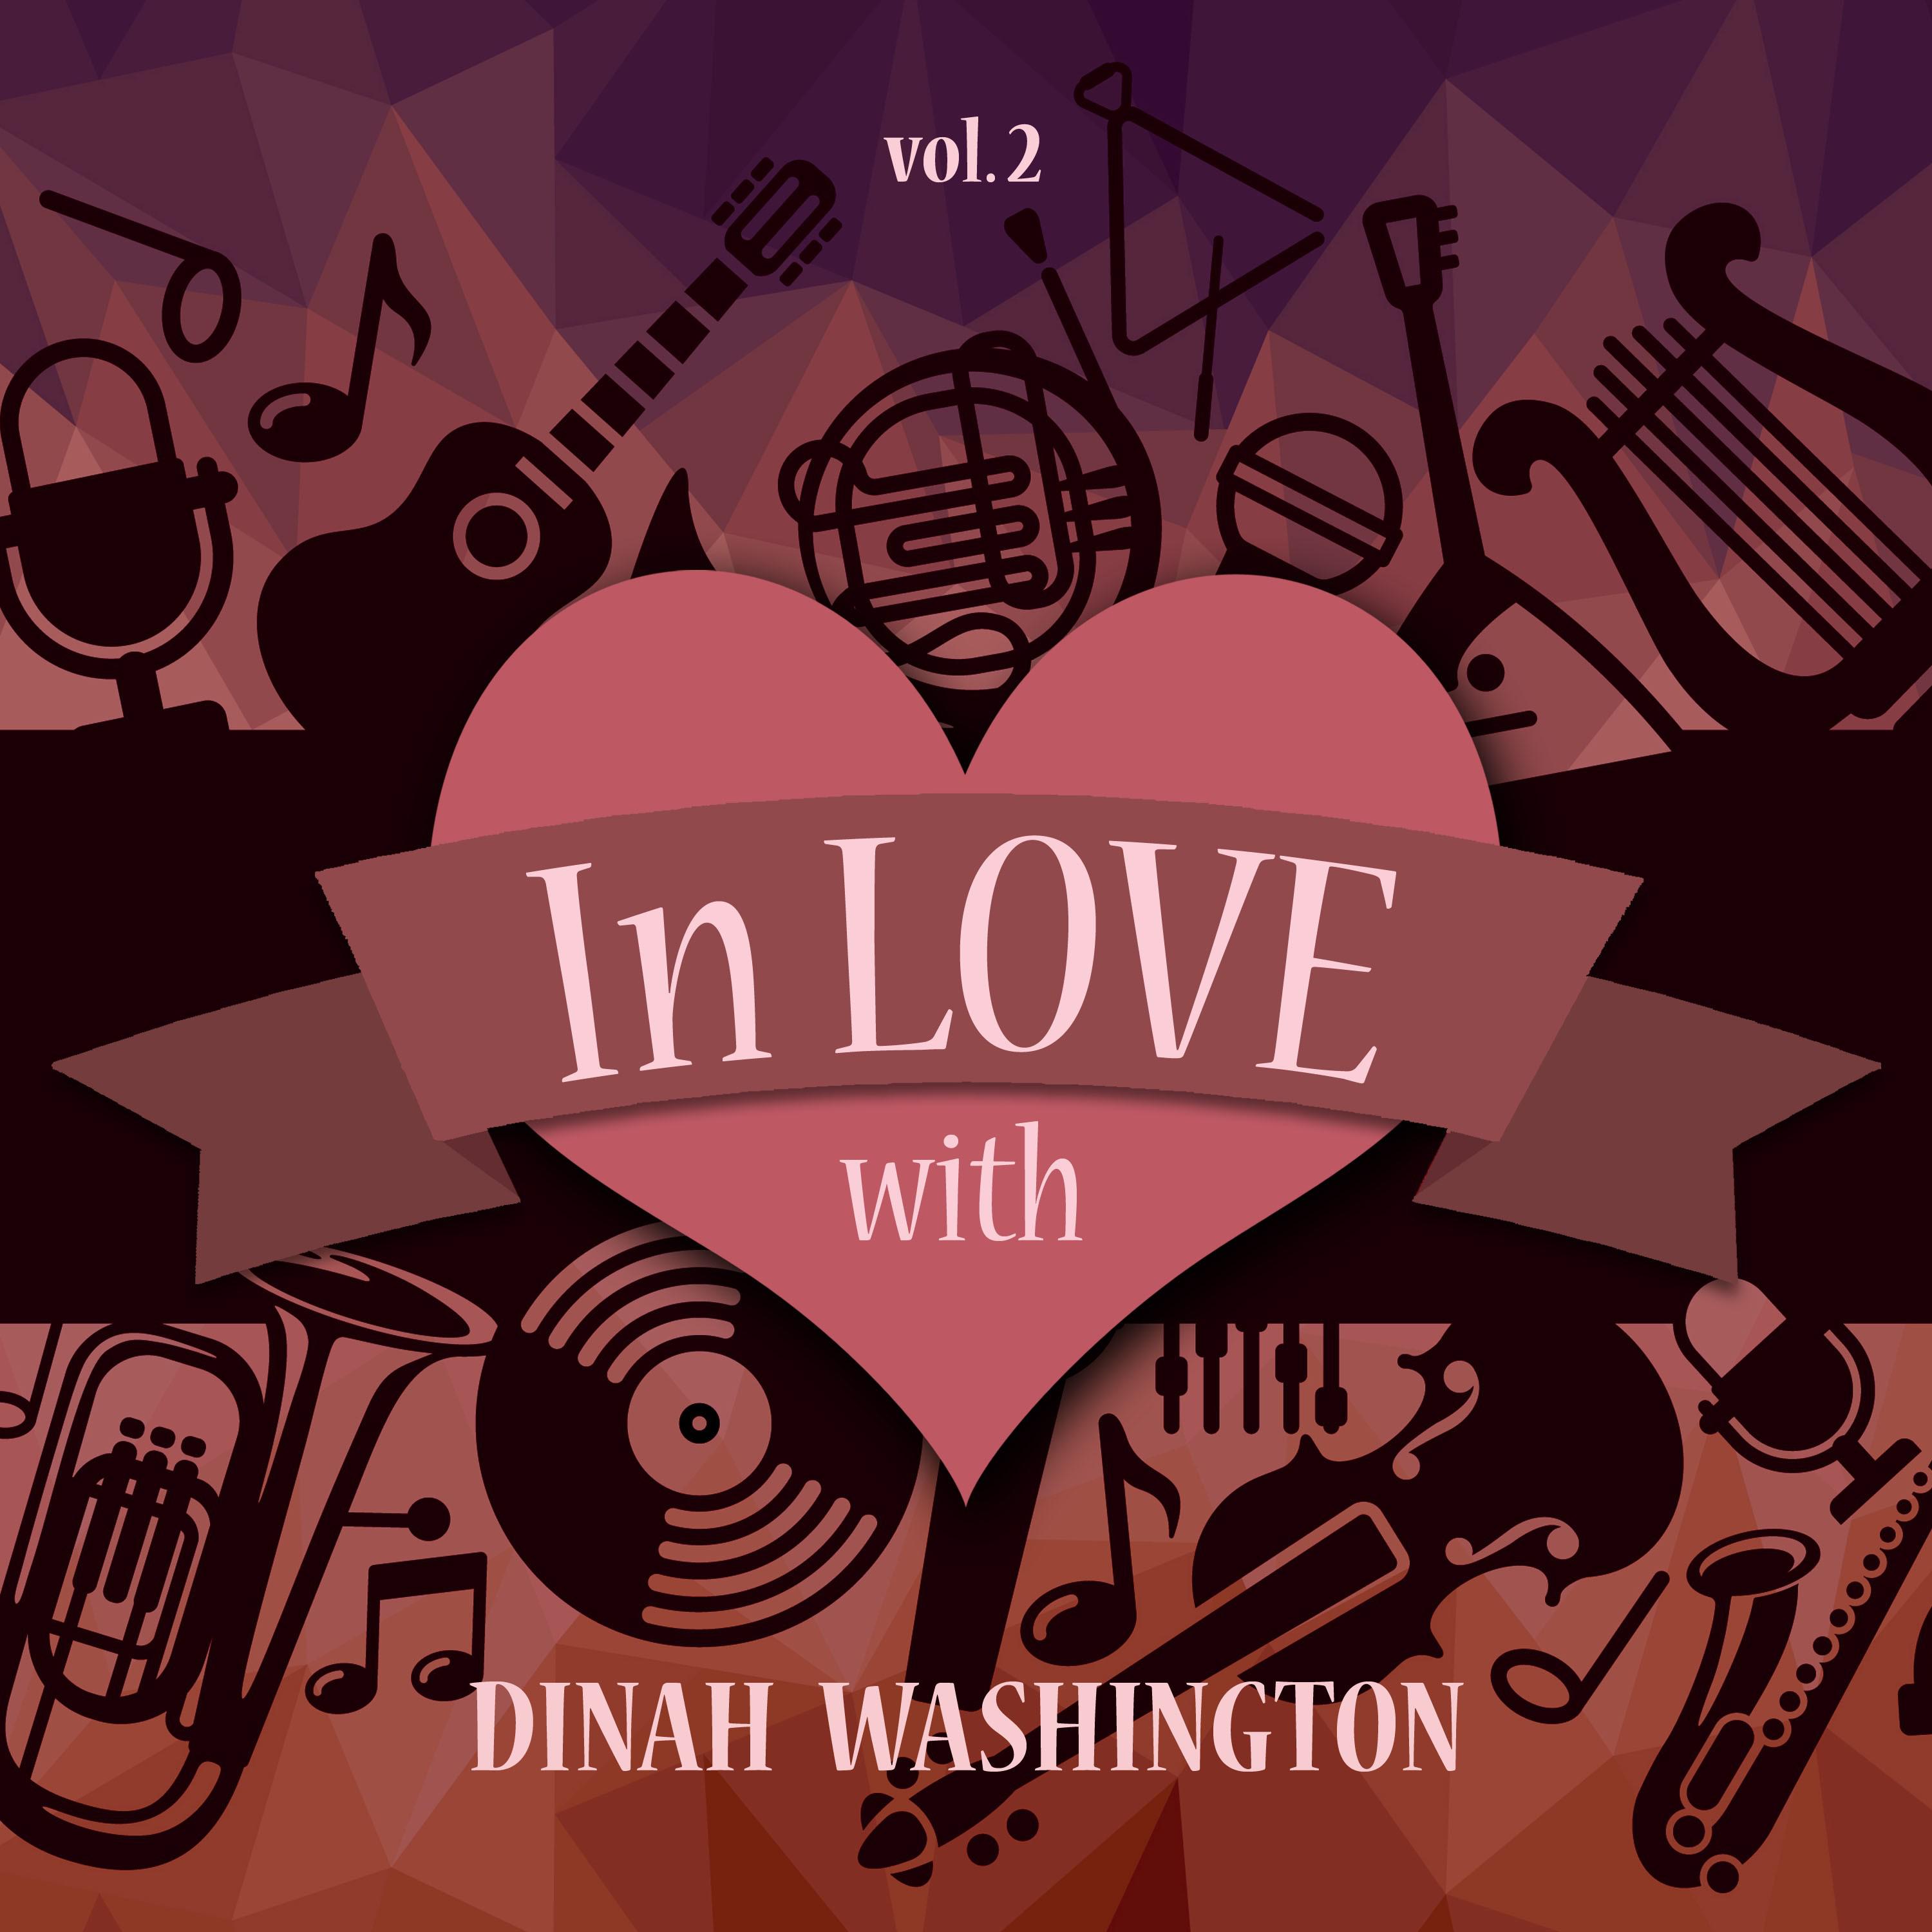 In Love with Dinah Washington, Vol. 2